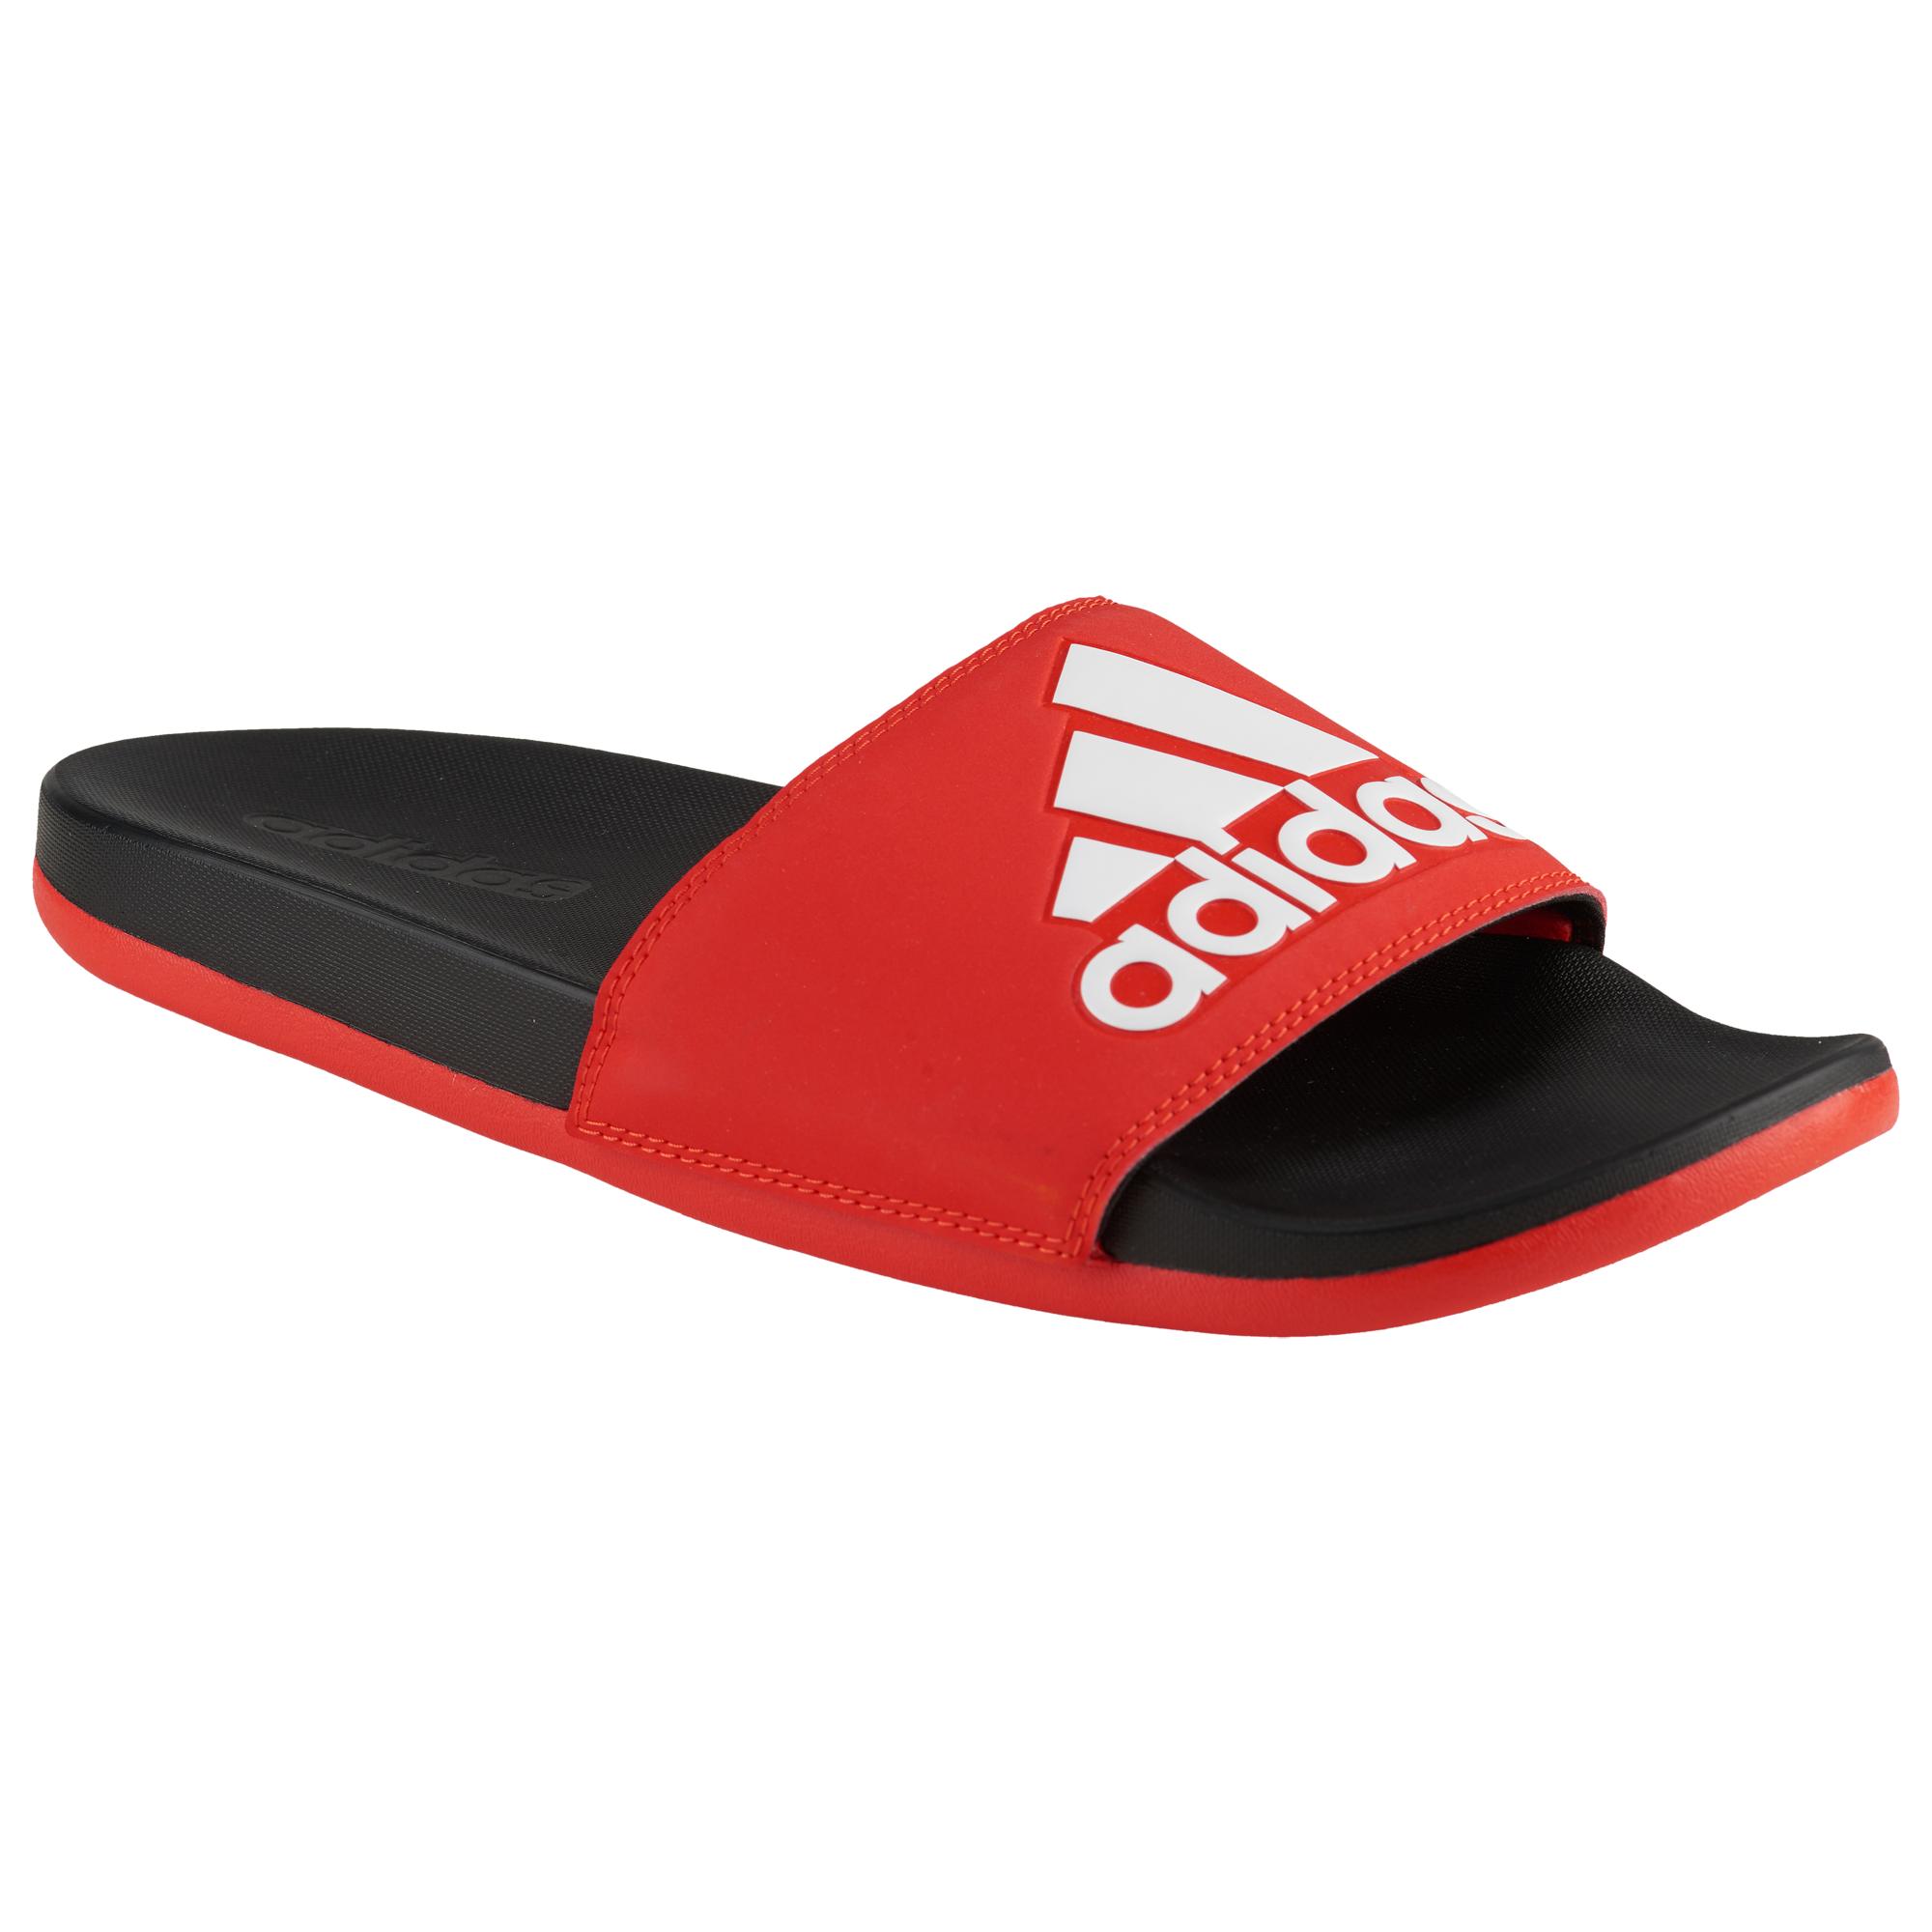 adidas Synthetic Adilette Comfort Slide Shoes in Red for Men - Lyst